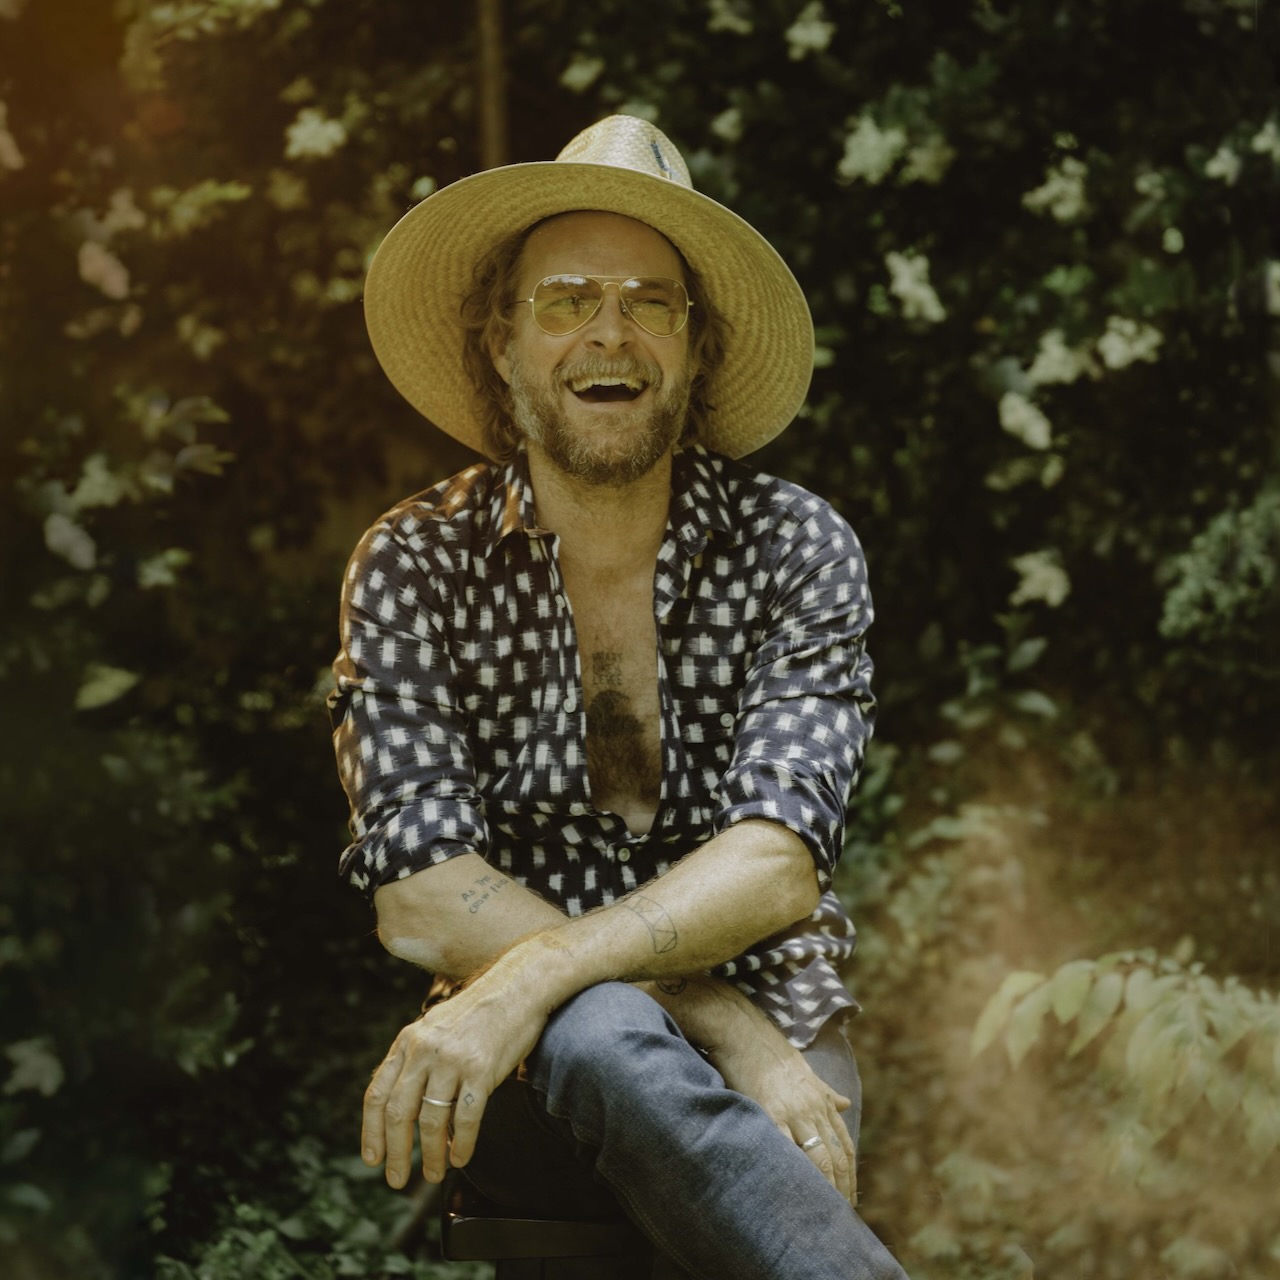 Nashville Contemporary: An Interview with Dave Rawlings